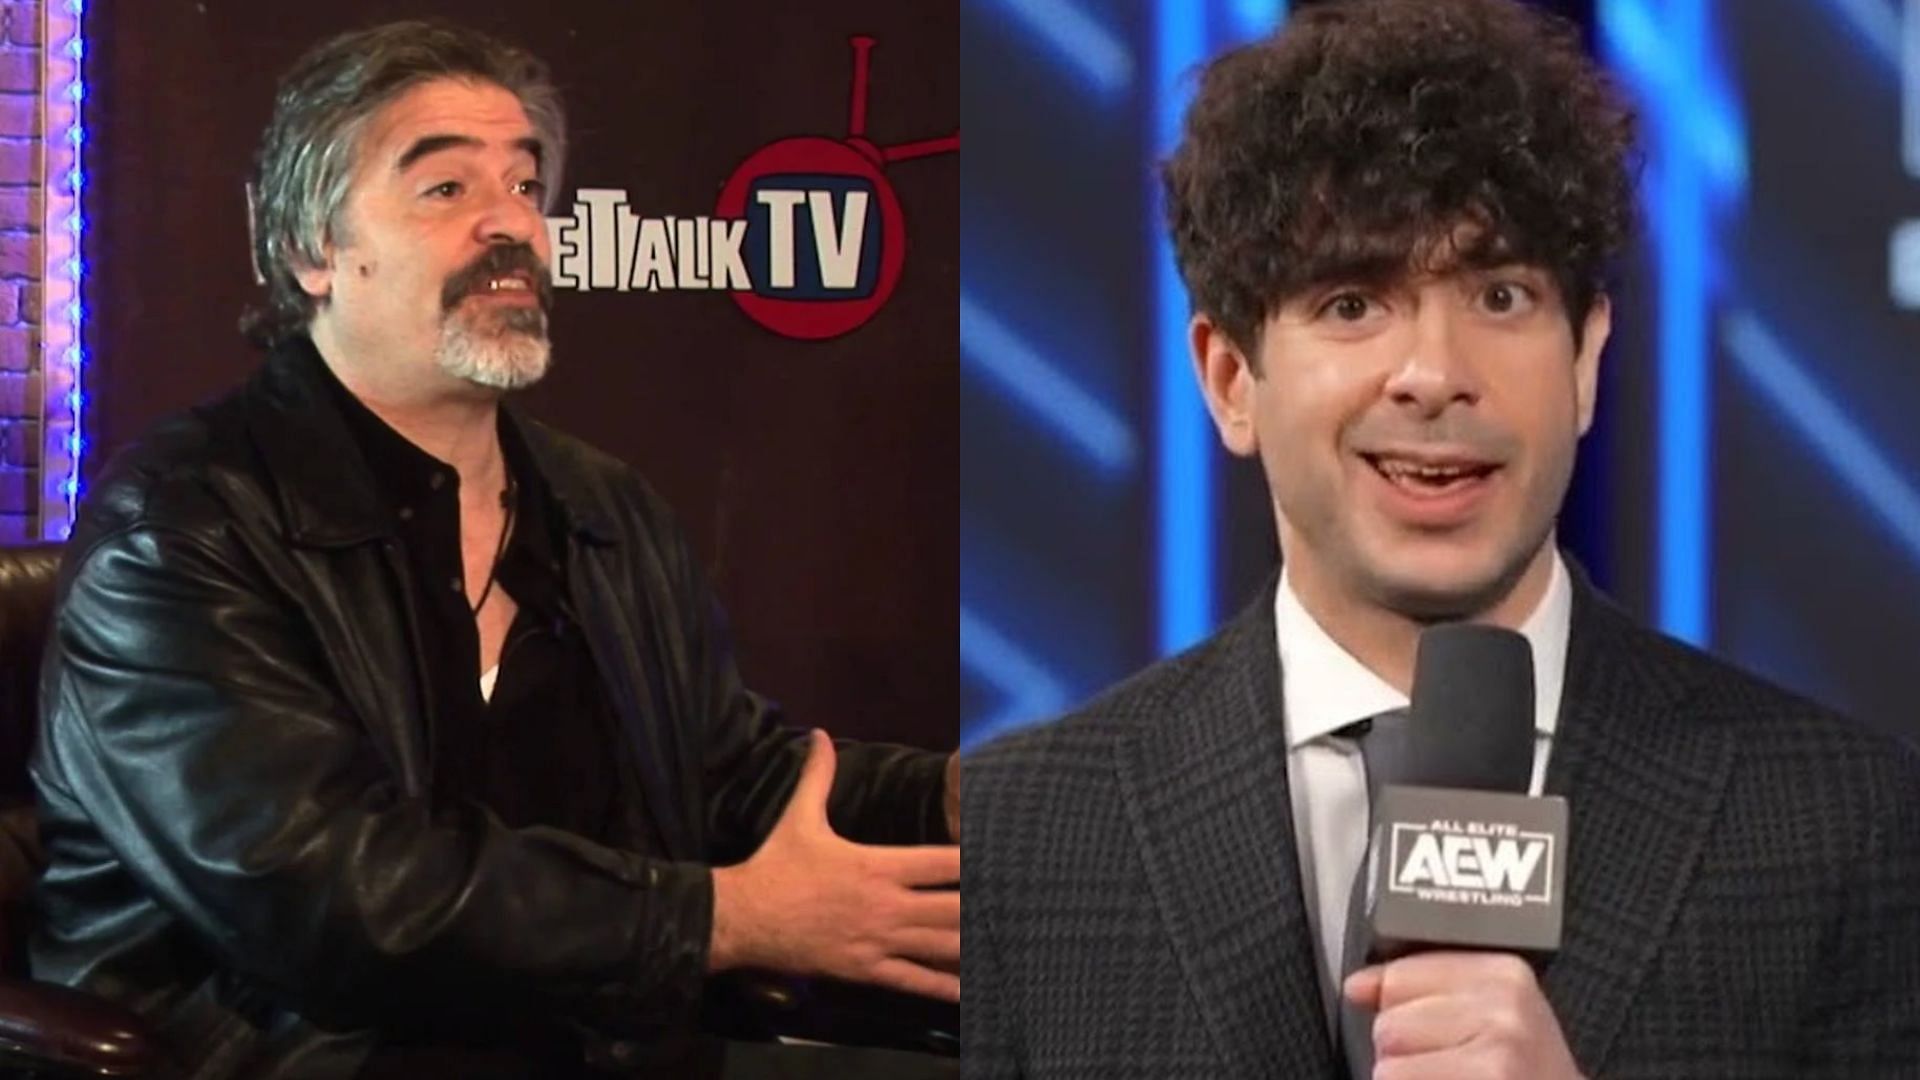 Will Tony Khan listen to Vince Russo